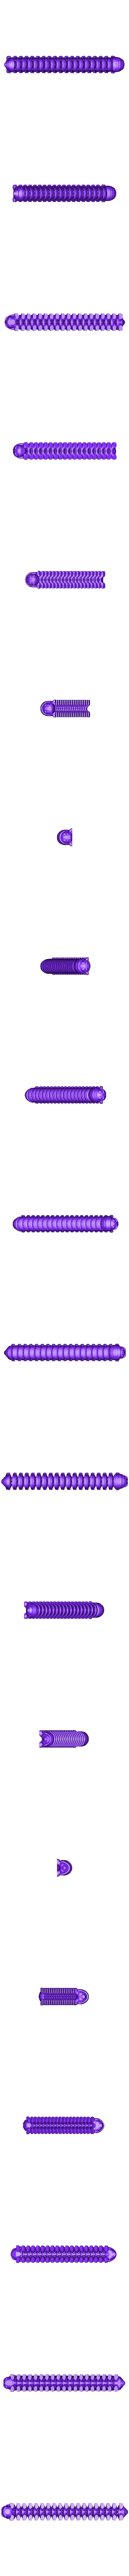 loubie_millipede_150mm.stl Free STL file Milli: Print in place, support free,articulated millipede・Object to download and to 3D print, loubie